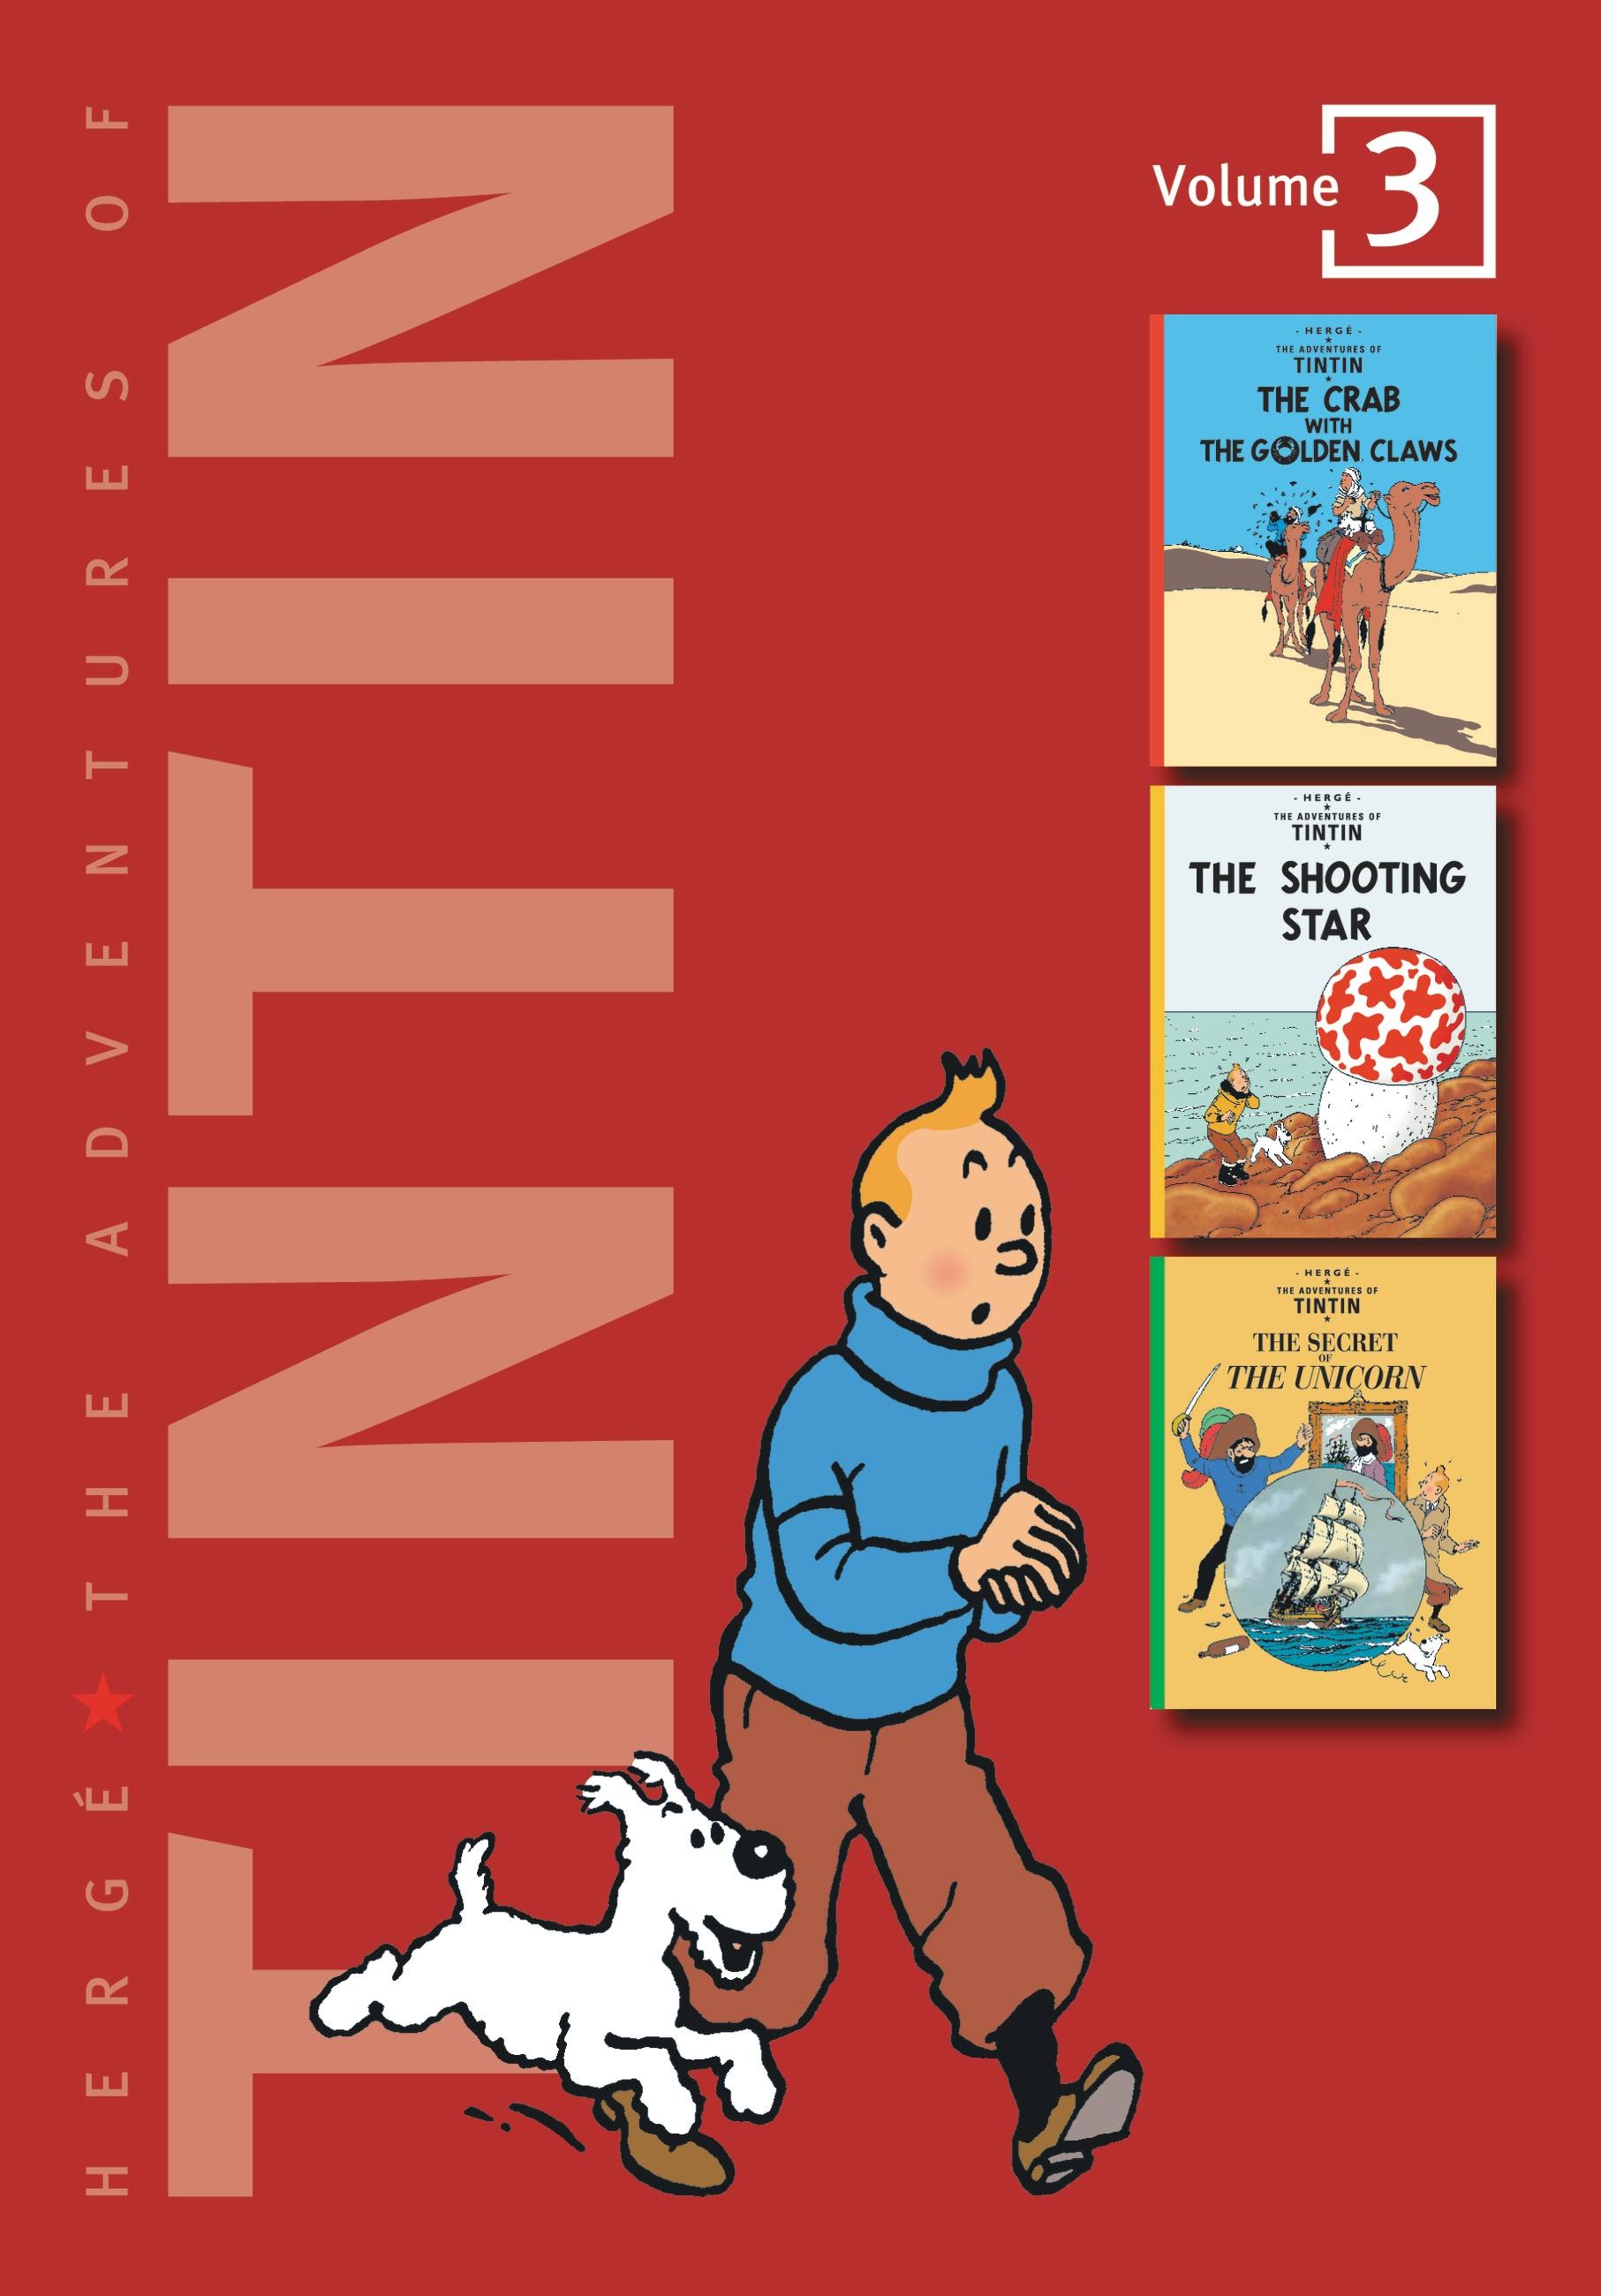 The Adventures of Tintin: Volume by Hergé Hachette Book Group